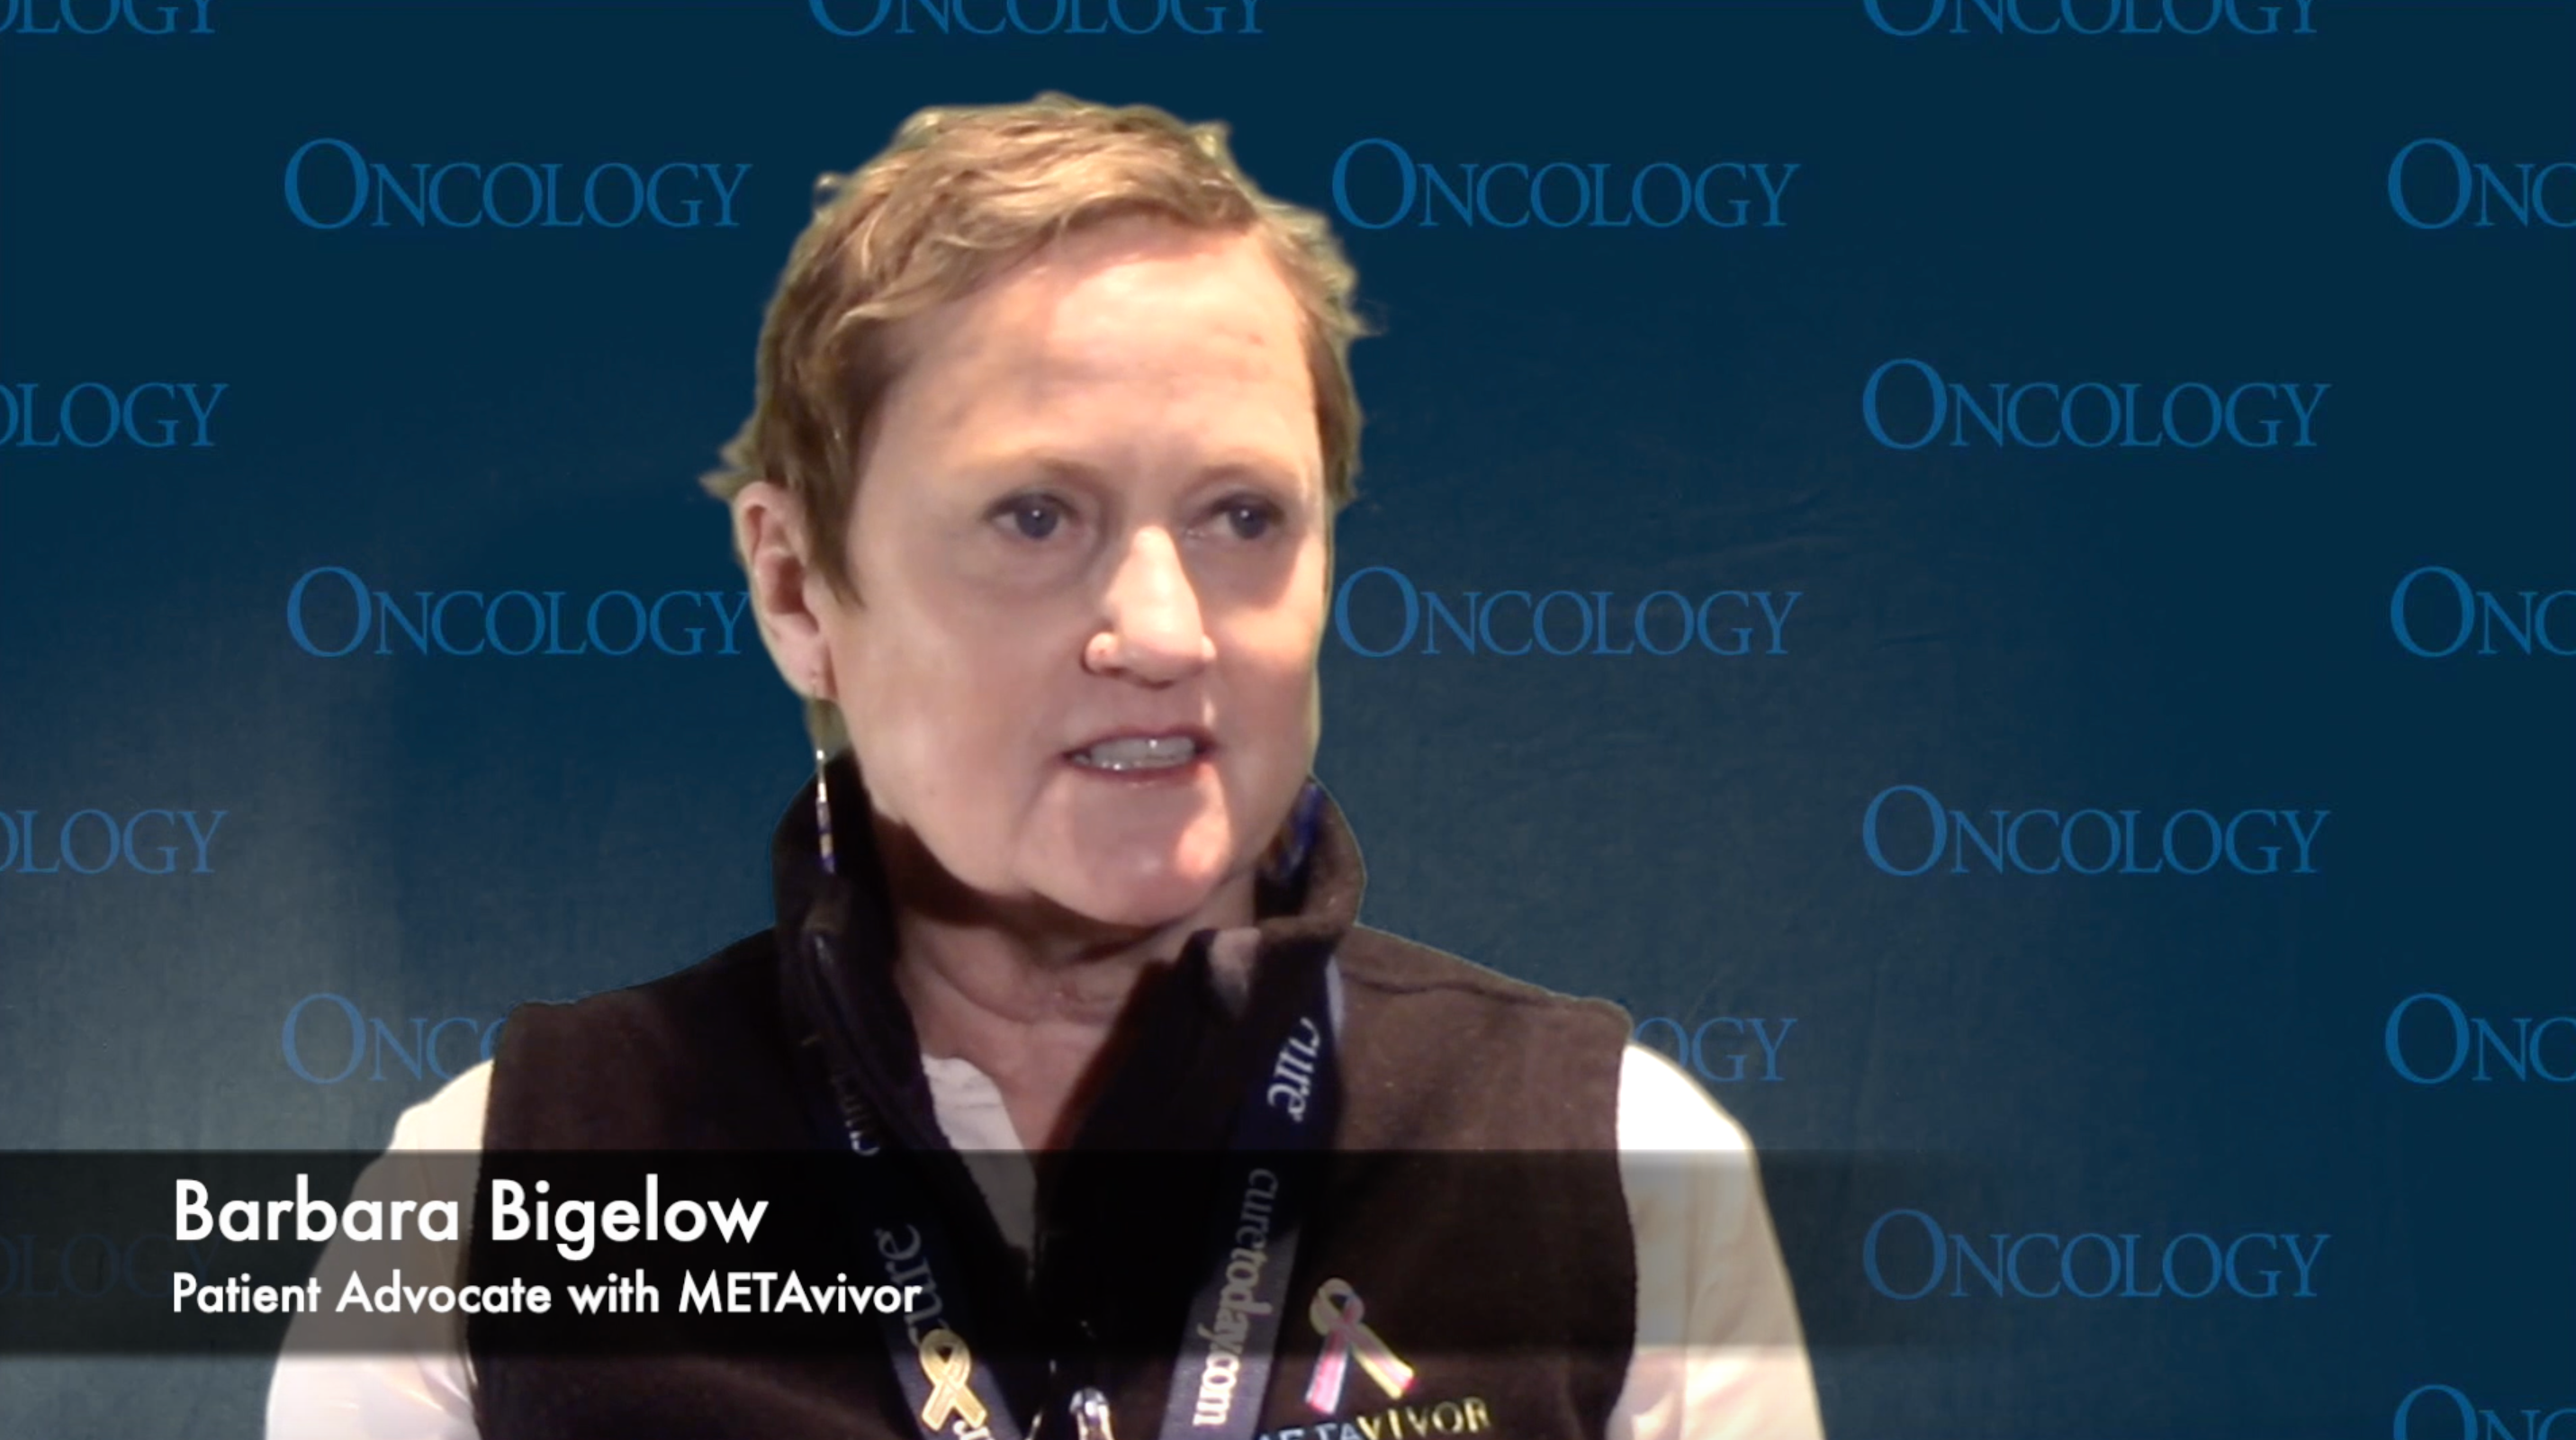 Barbara Bigelow Discusses her Journey with Triple Negative Breast Cancer